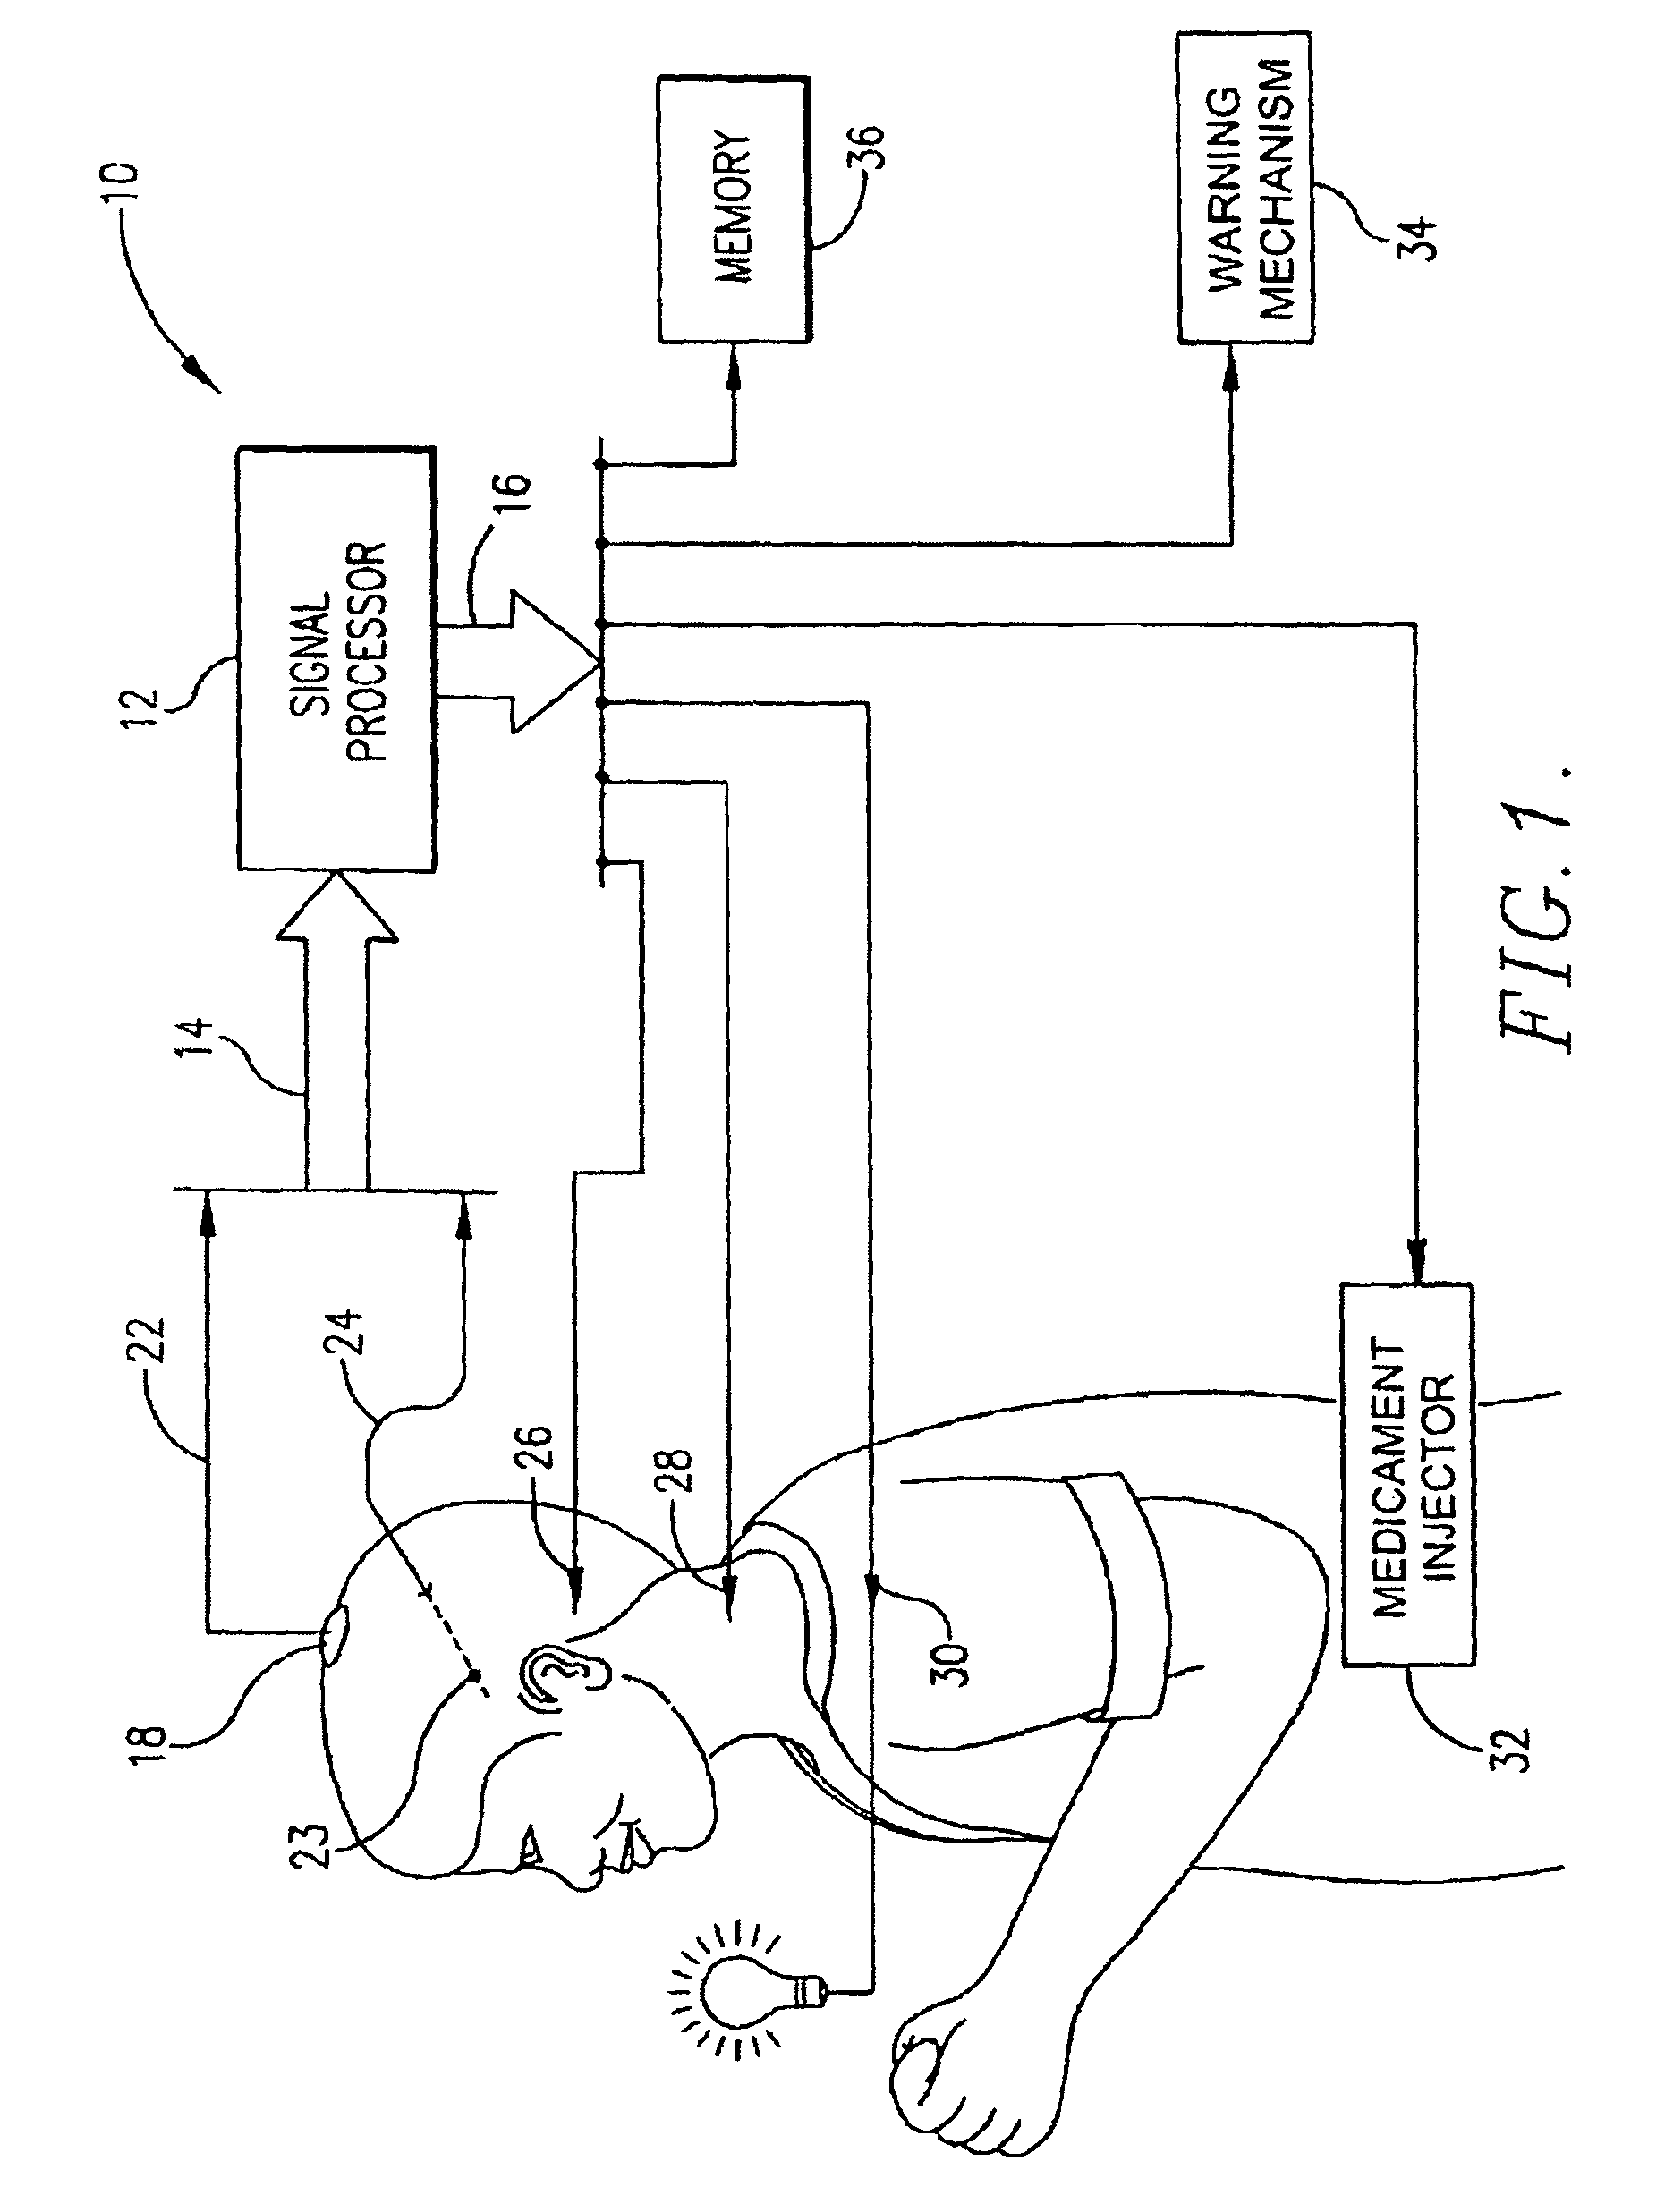 Method and system for the prediction, rapid detection, warning, prevention, or control of changes in the brain states of a subject using hurst parameter estimation